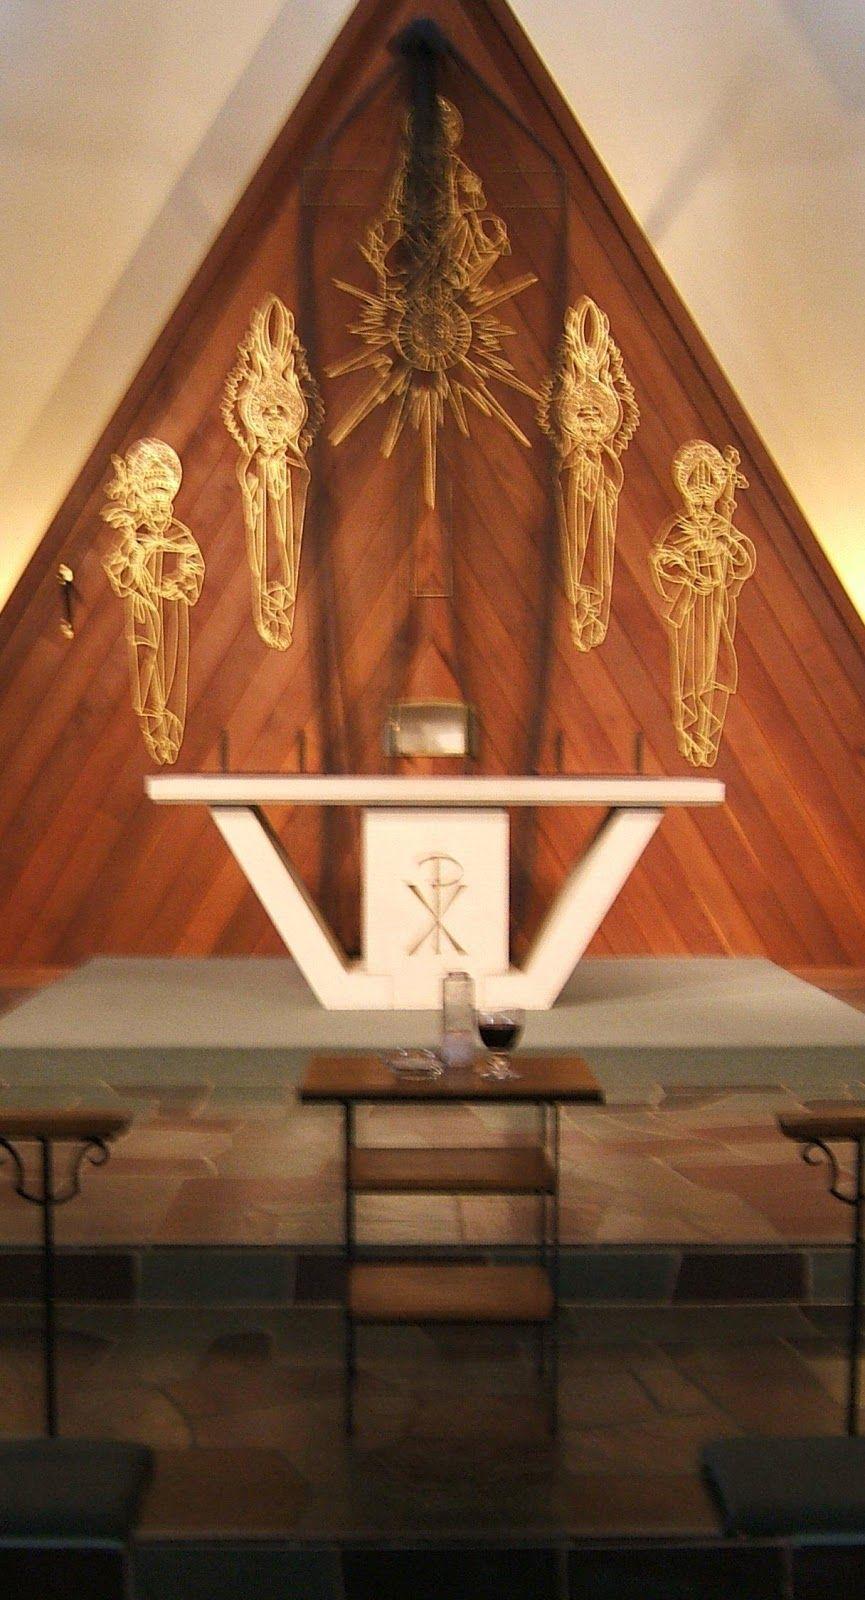 Good Friday: Cover reredos with black Set out chalice and purificator on